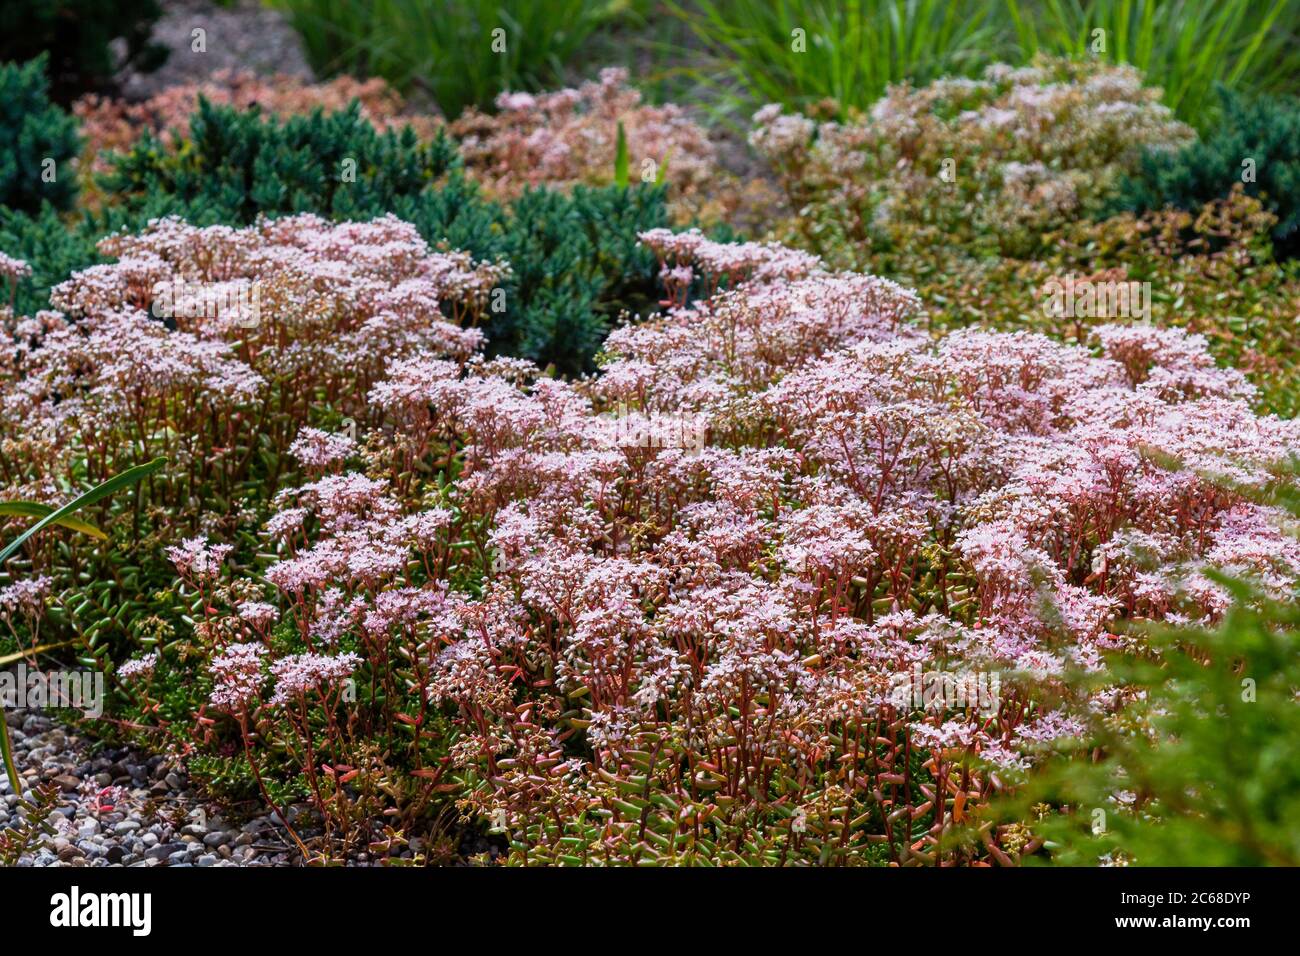 Sedum 'Murale' blooming in a mixed landscape garden with grasses and evergreen shrubs. Stock Photo